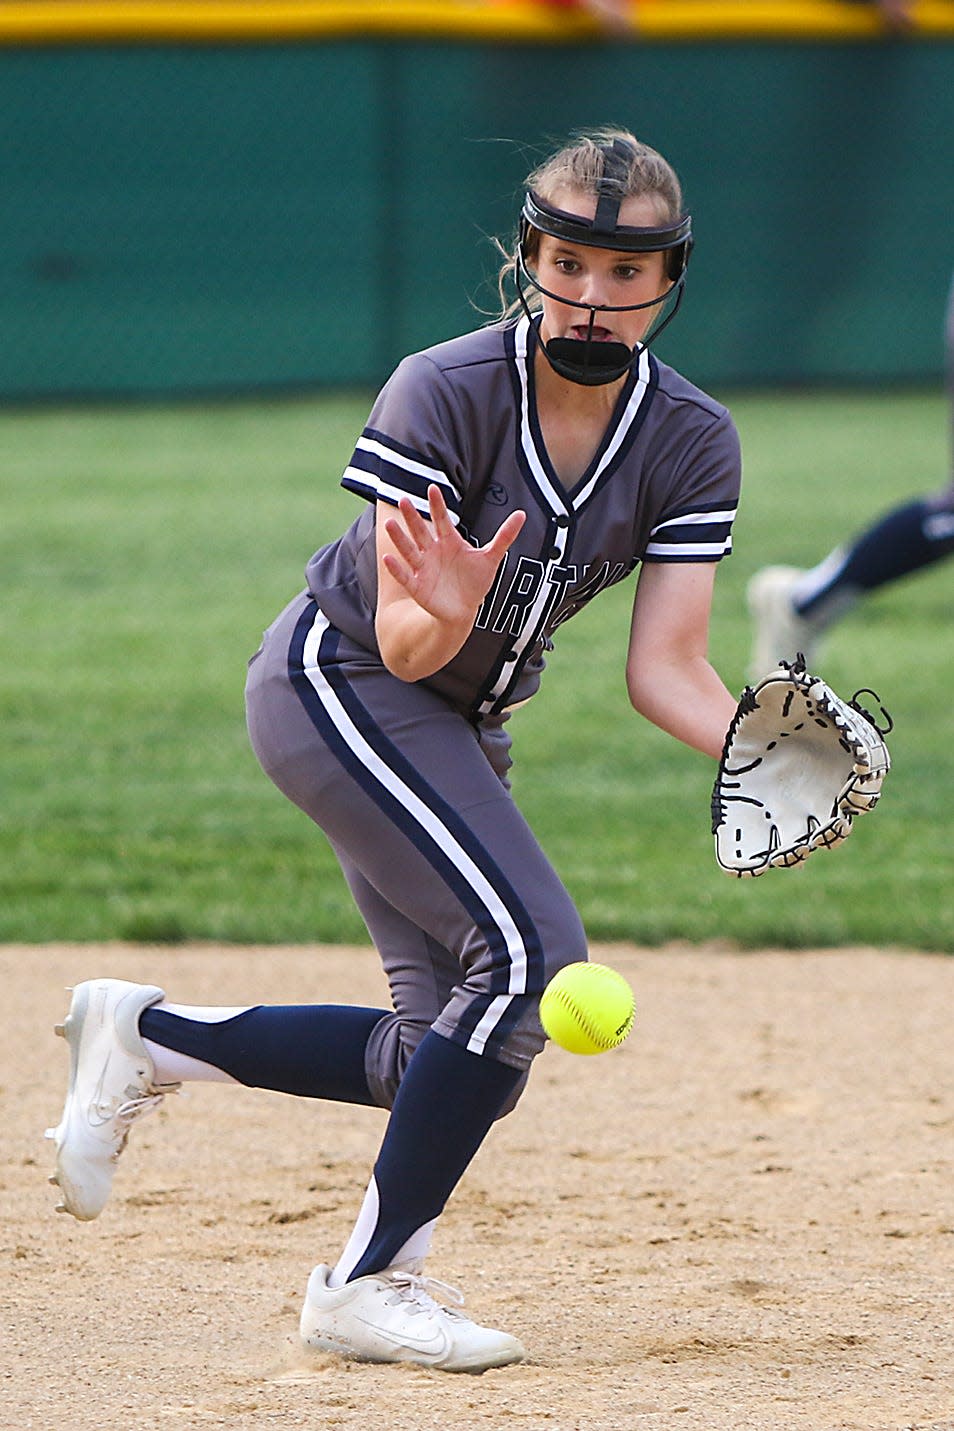 Ridgewood shortstop Clara Franks preps to make a play in Tuesday's Class 1A sectional semifinal against Peru St. Bede. The Spartans fell to the Bruins 4-3 in nine innings in Williamsfield.